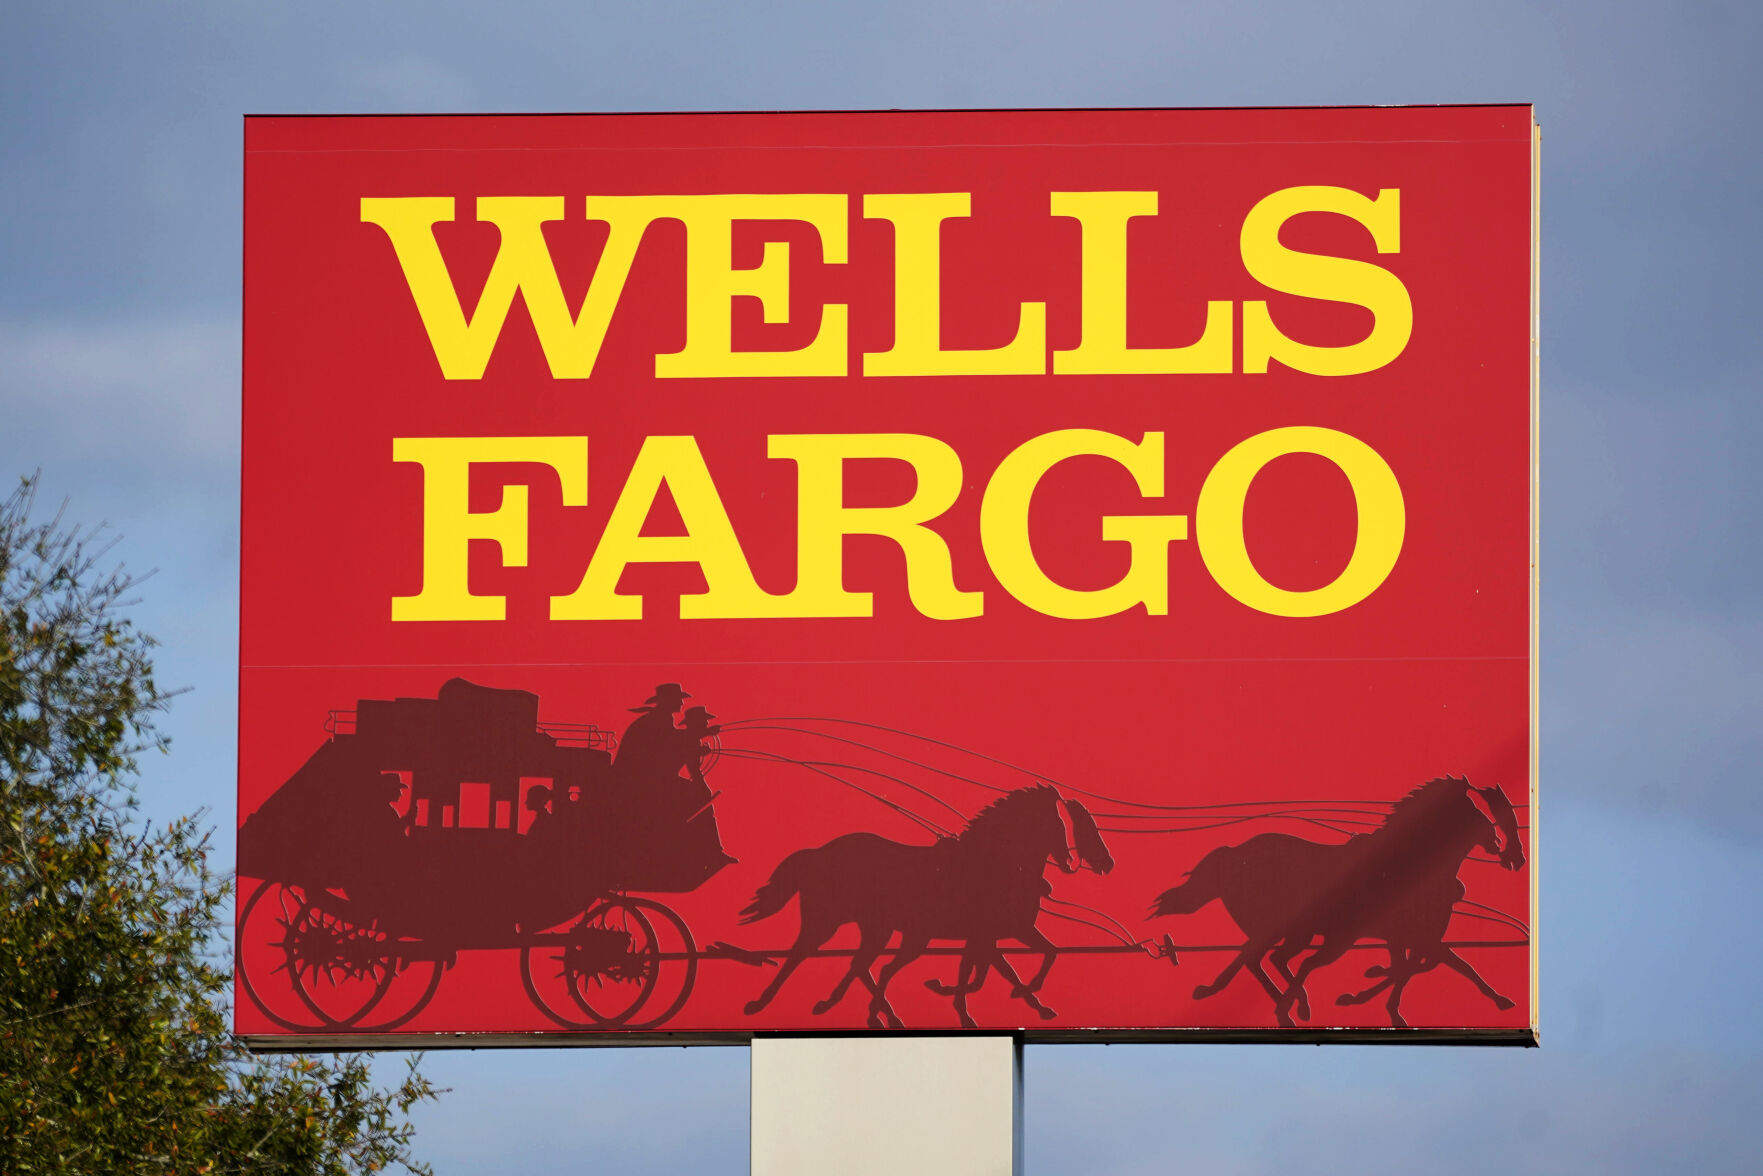 <p>FILE - A Wells Fargo sign stands in front of a branch of the bank in Bradenton, Fla., Tuesday, Feb. 22, 2022. Consumer banking giant Wells Fargo is being ordered to pay $3.7 billion in fines and refunds to customers by U.S. government regulators, the largest fine to date against the bank. (AP Photo/Gene J. Puskar, File)</p>   PHOTO CREDIT: Gene J. Puskar 